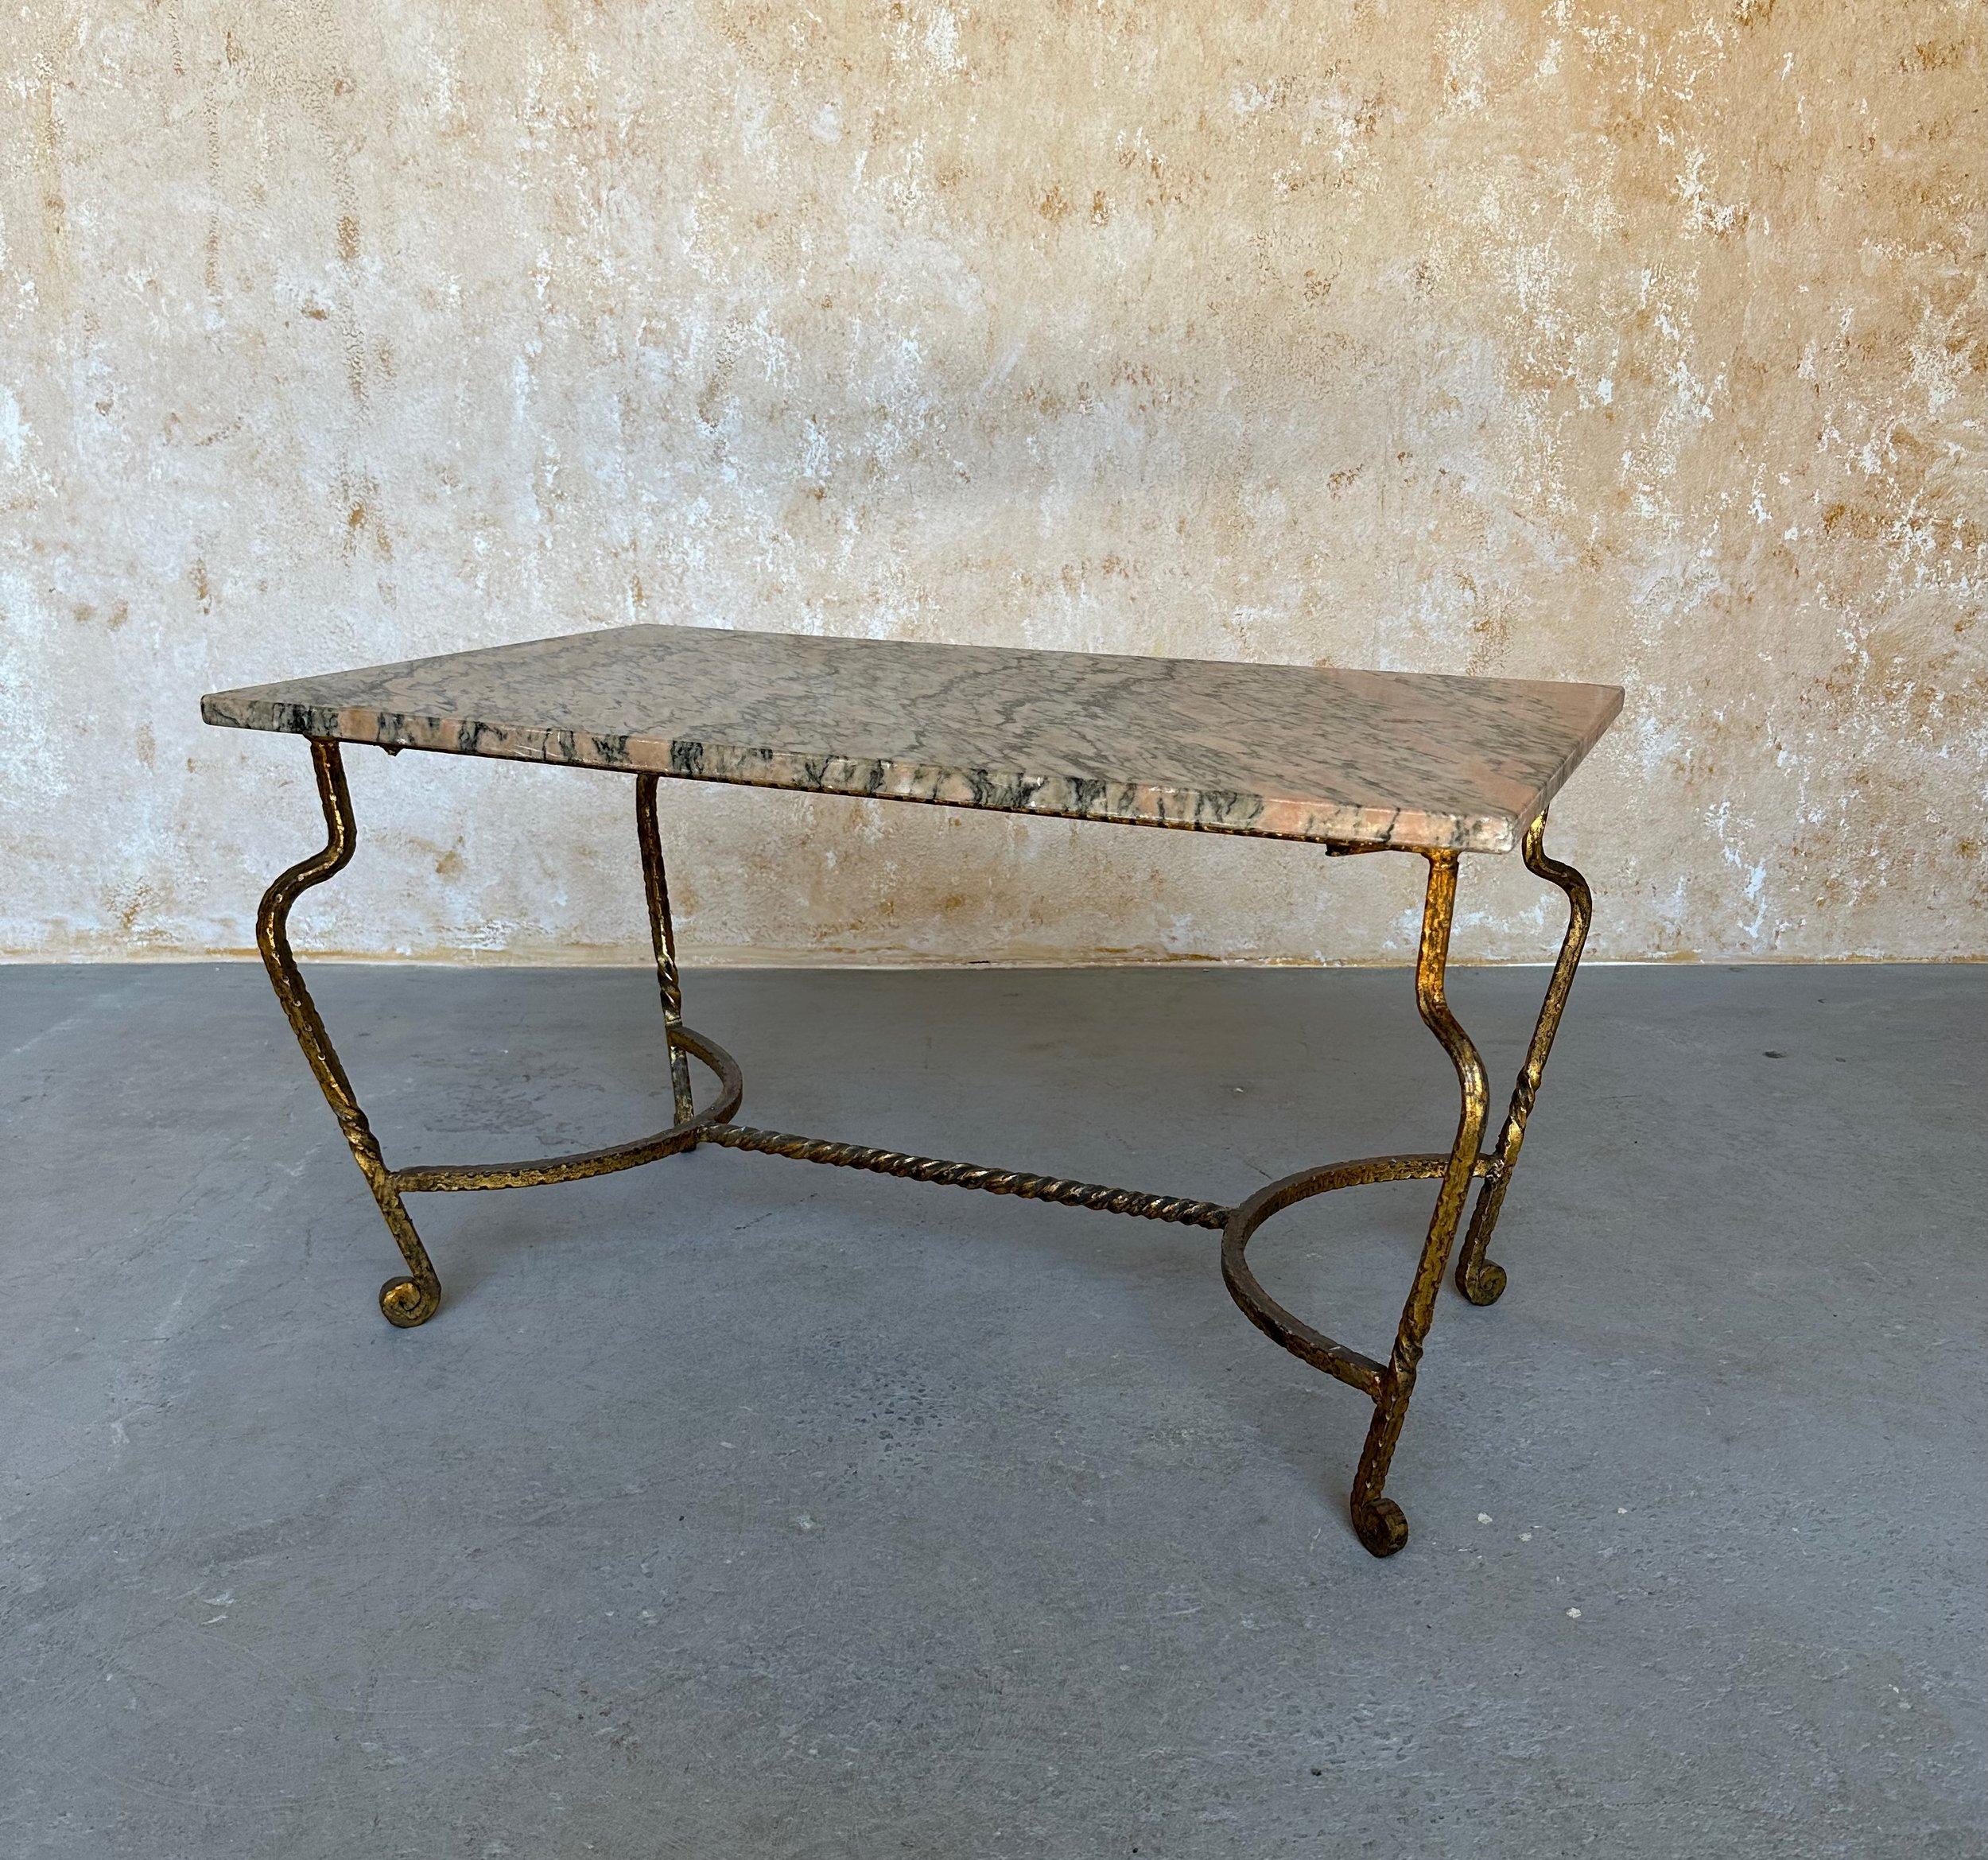 This elegant French 1950s coffee table features a unique twisted iron frame with hammered demi lune stretchers between the legs that support the central stretcher. The legs have extended curves and gently scrolled feet. The frame is finished in